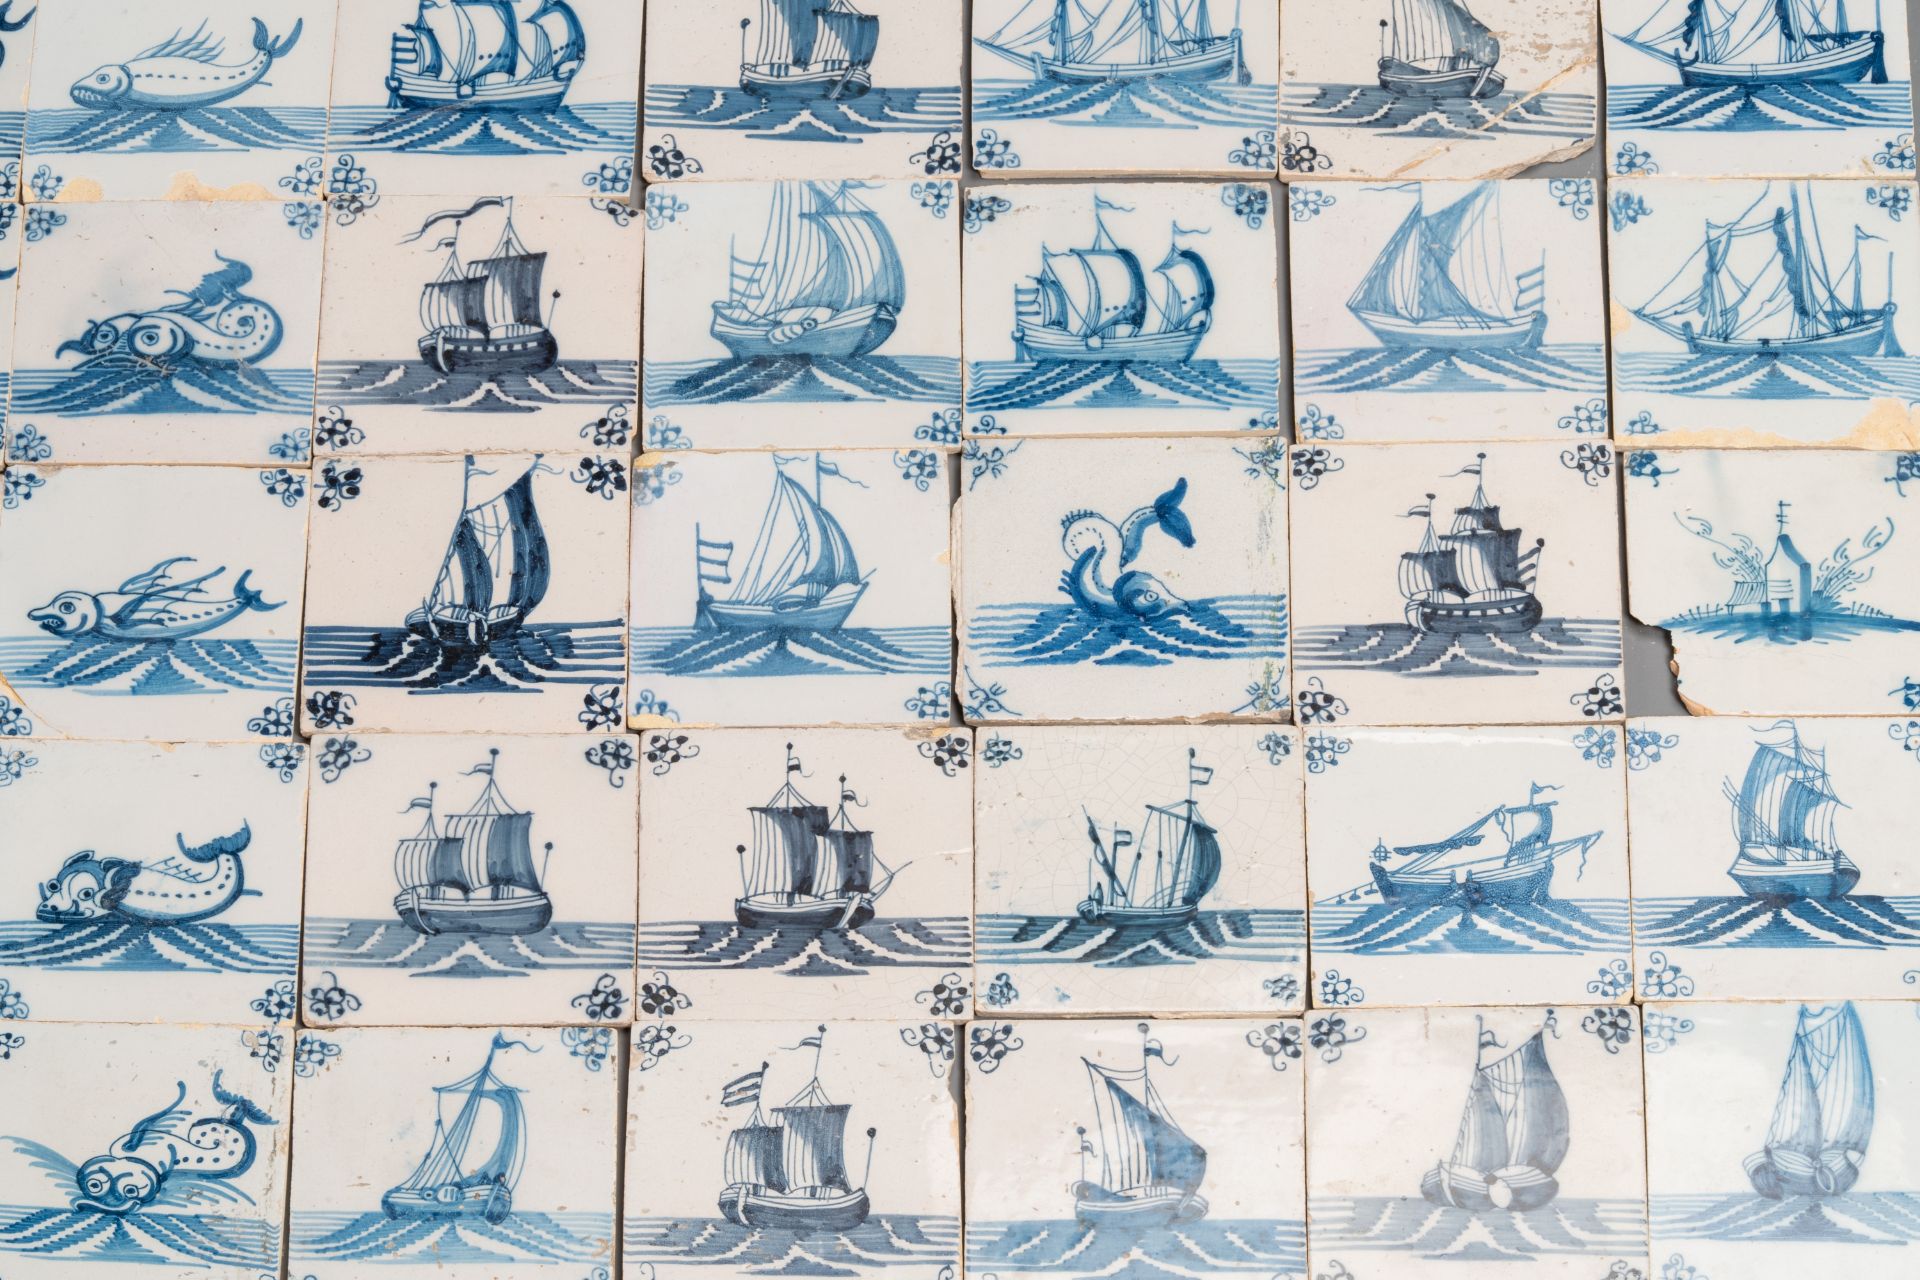 92 blue and white Dutch Delft tiles with sea monsters and ships, 18th C. - Image 15 of 16